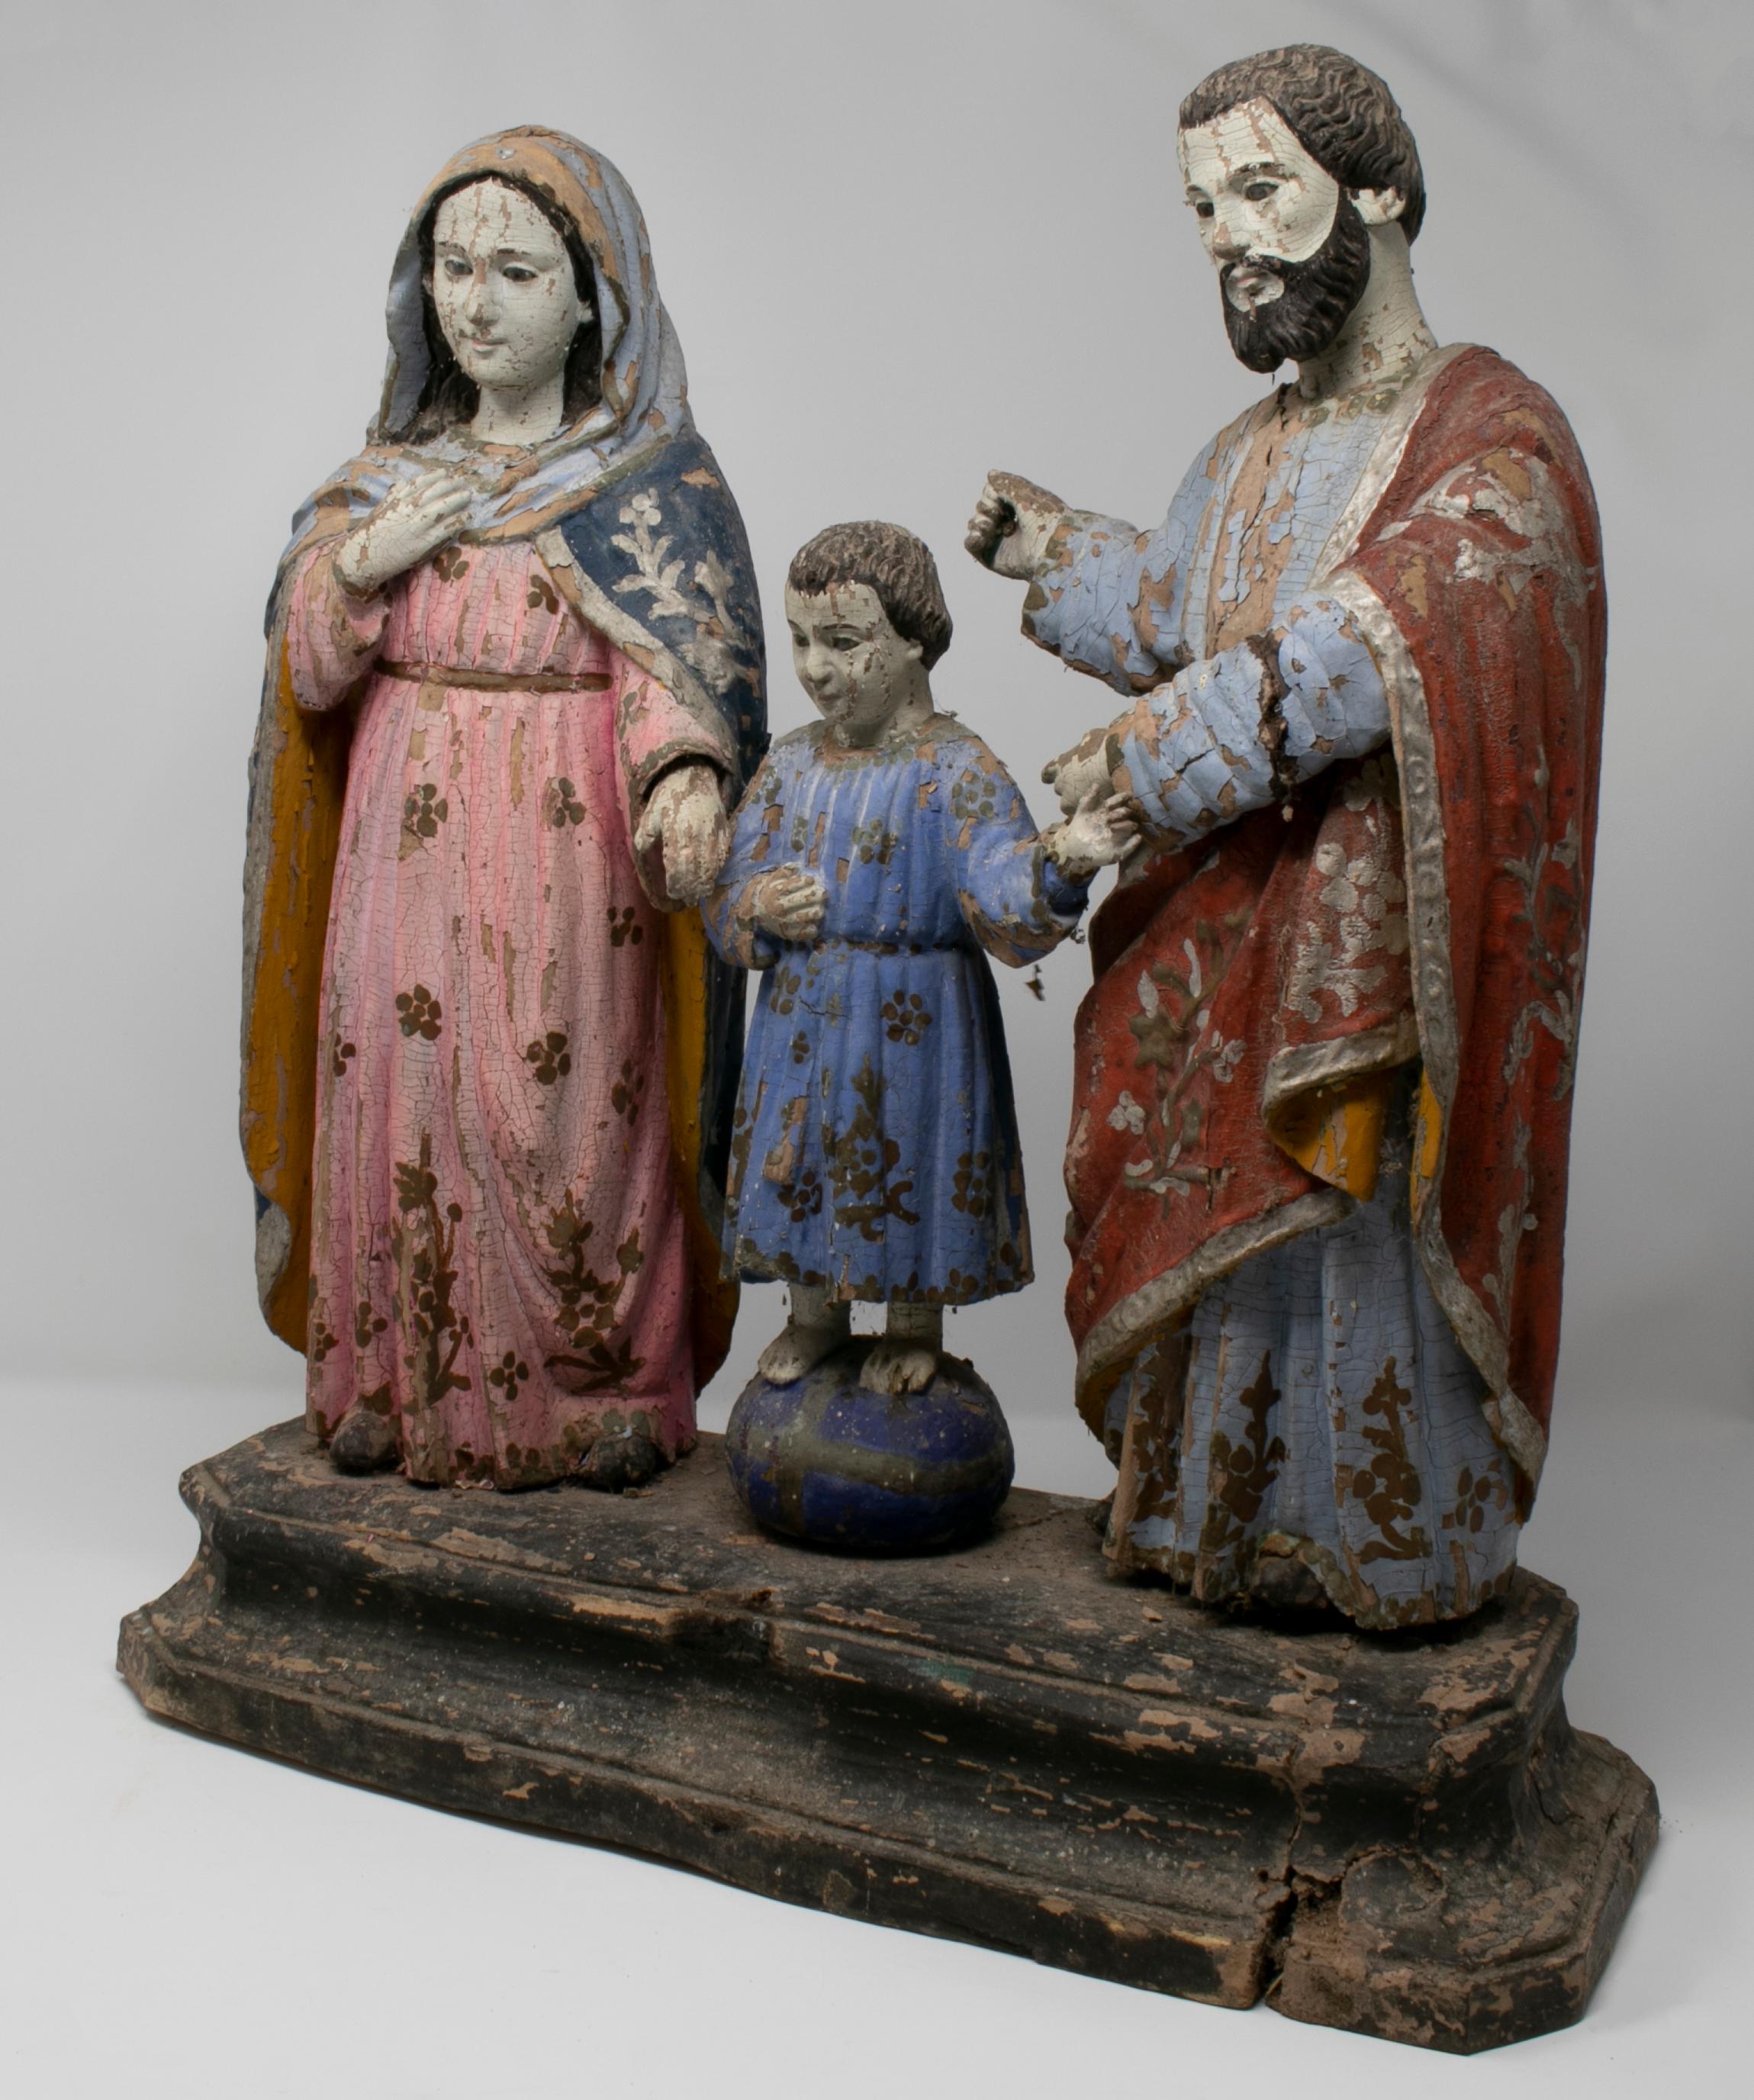 19th century Filipino Holy Family painted wood figure sculpture.